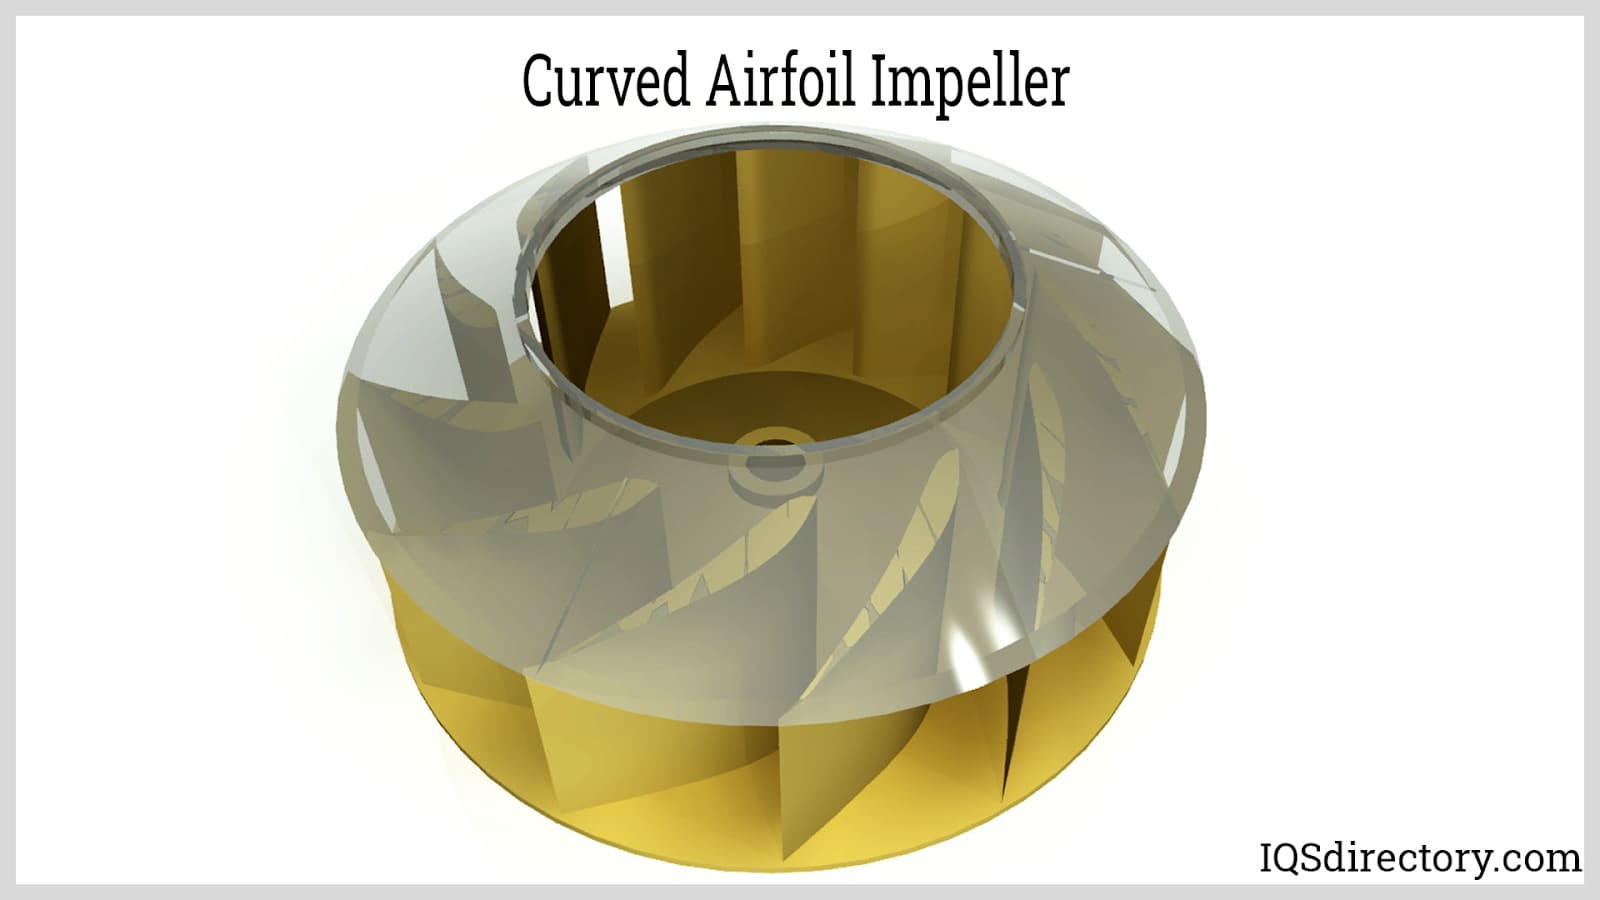 Curved Airfoil Impeller